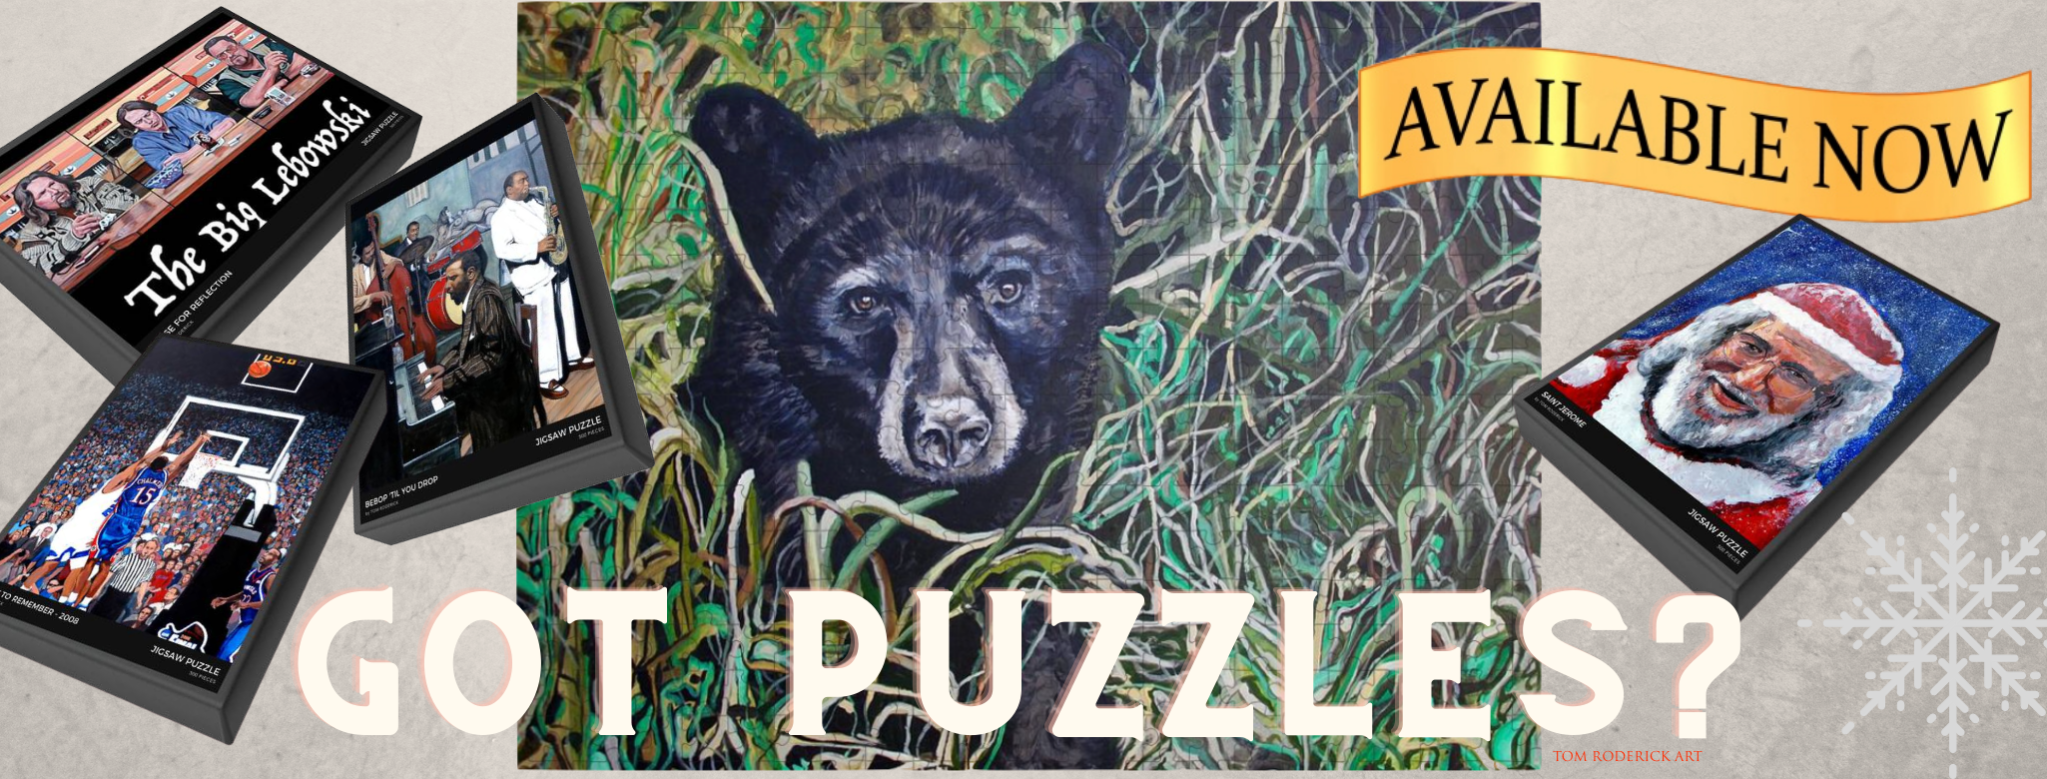 Puzzle by American artist Tom Roderick